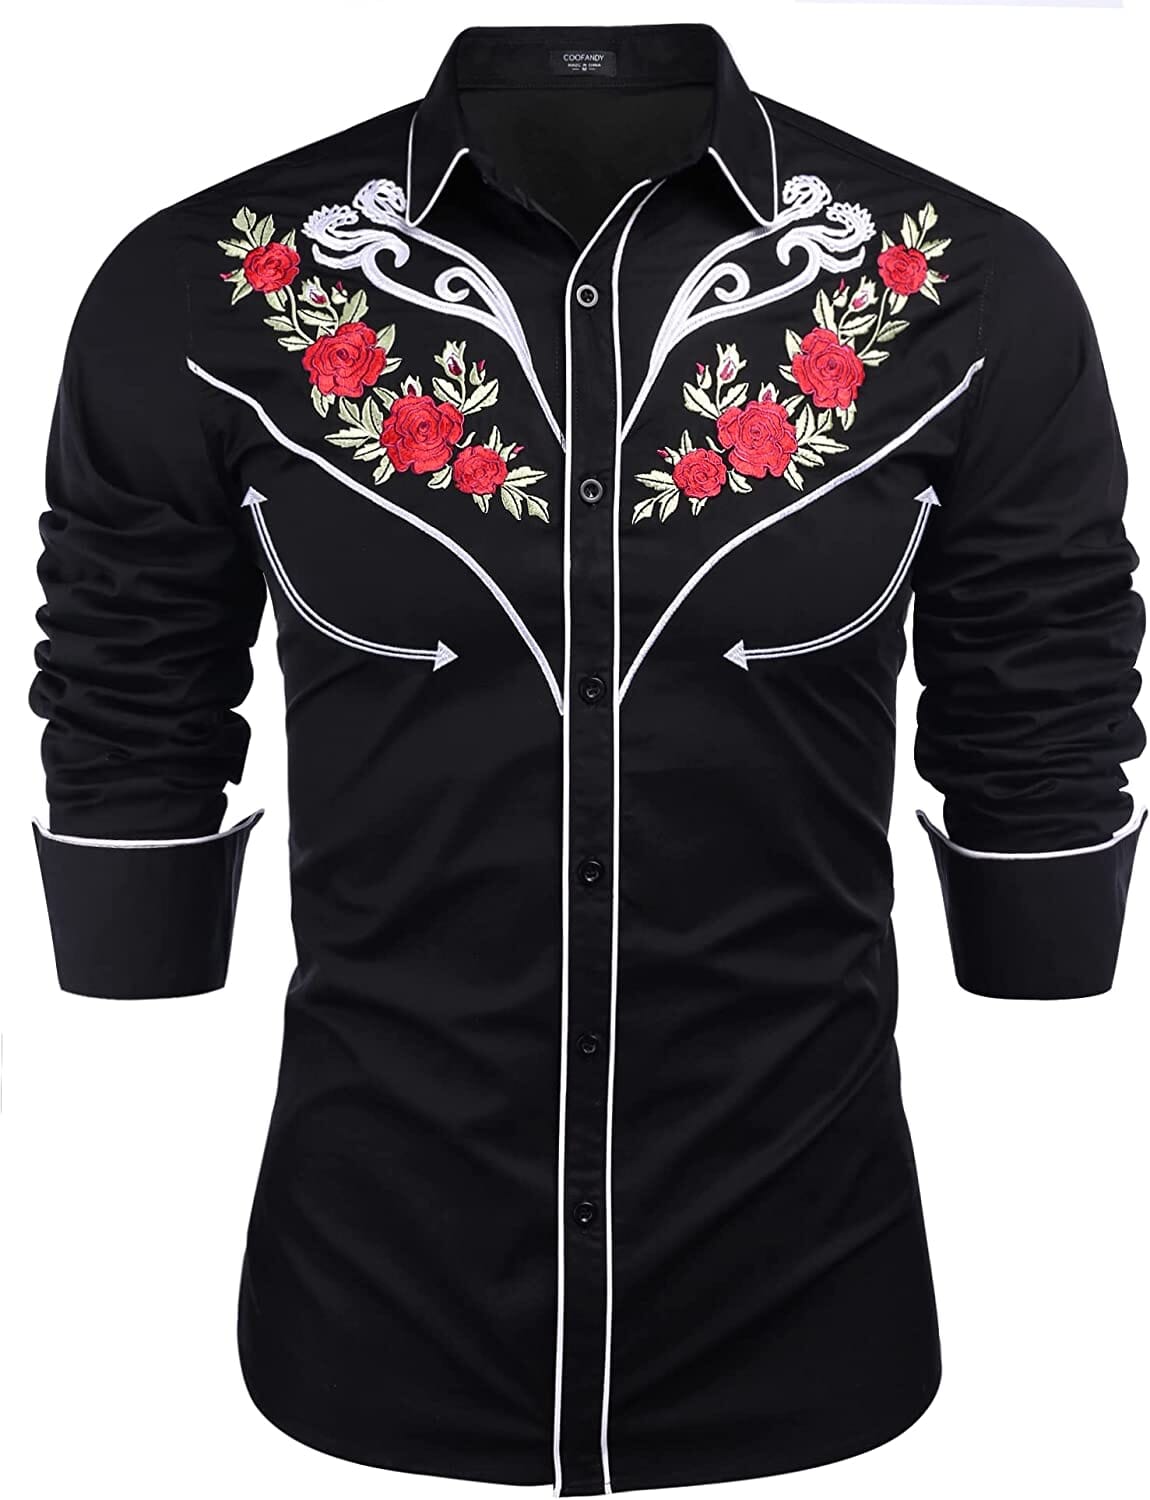 Western Cowboy Embroidered Button Down Cotton Shirt (US Only) Shirts COOFANDY Store Black (Retro Rose) S 